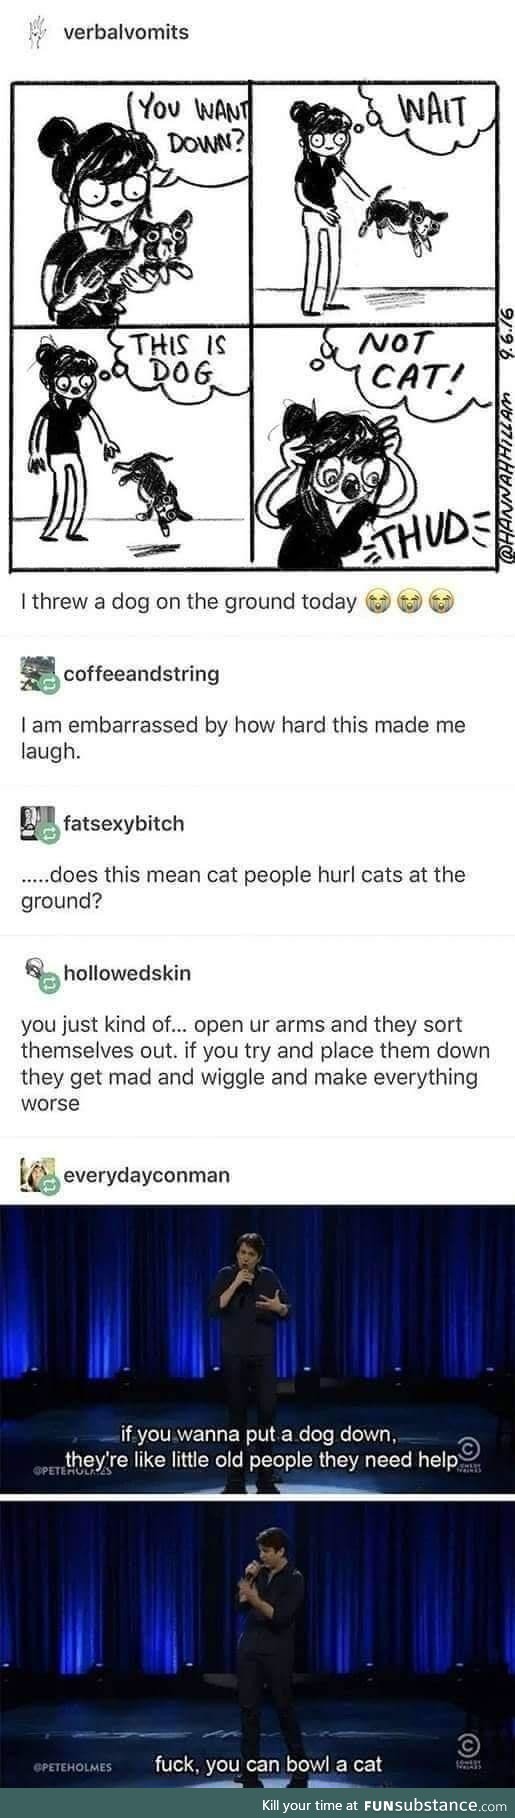 Bowling with cats